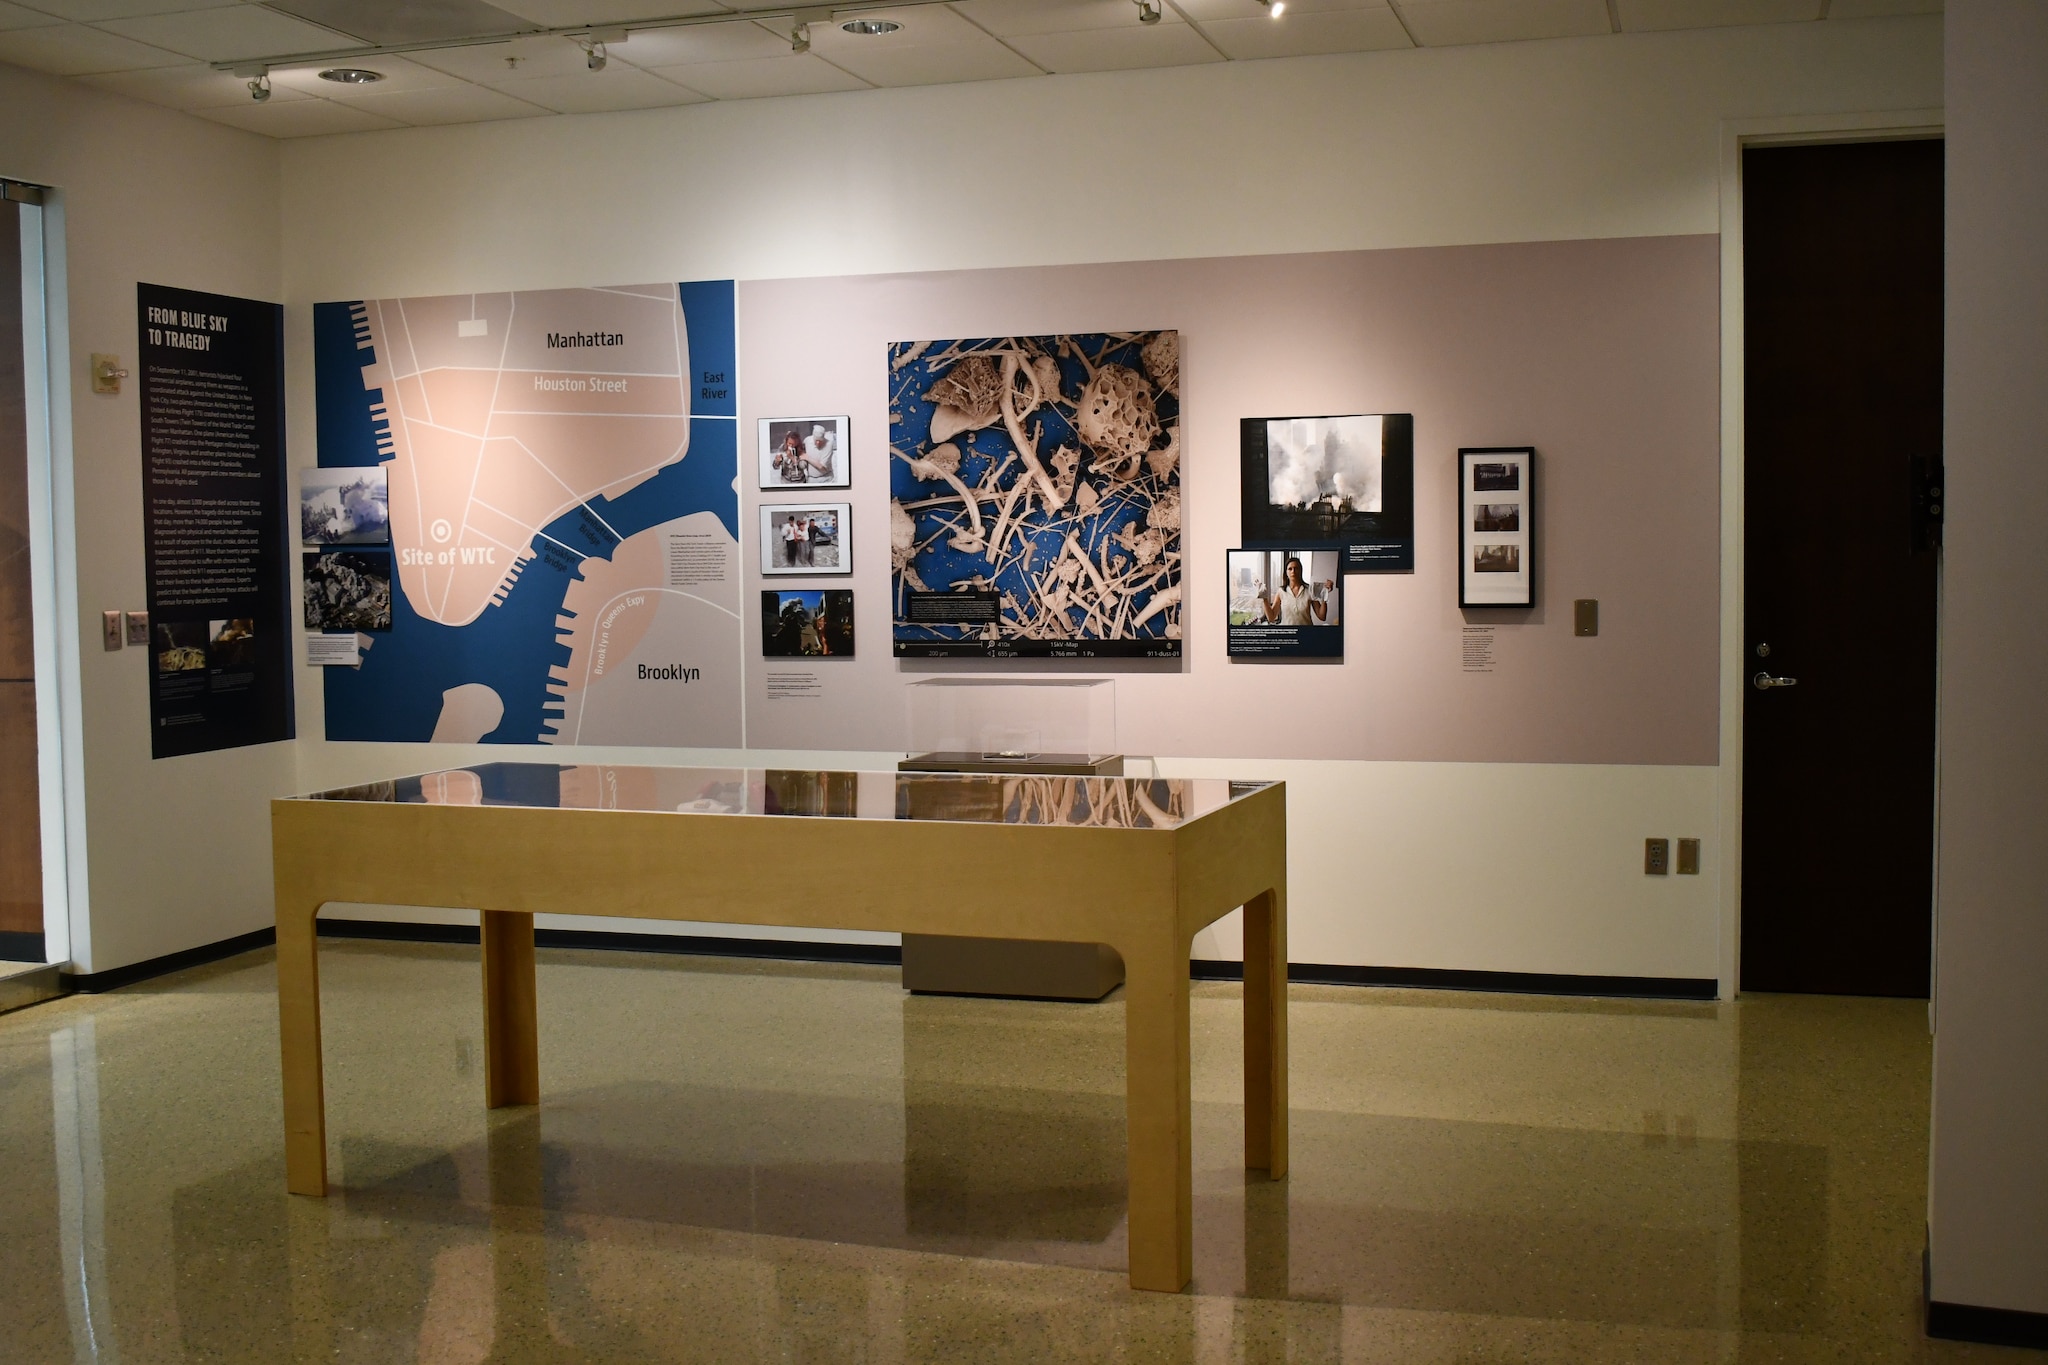 A wall displaying a map, images of 9/11 survivors and responders, and a microscopic view of dust from the Health Effects of 9/11 Exhbition.